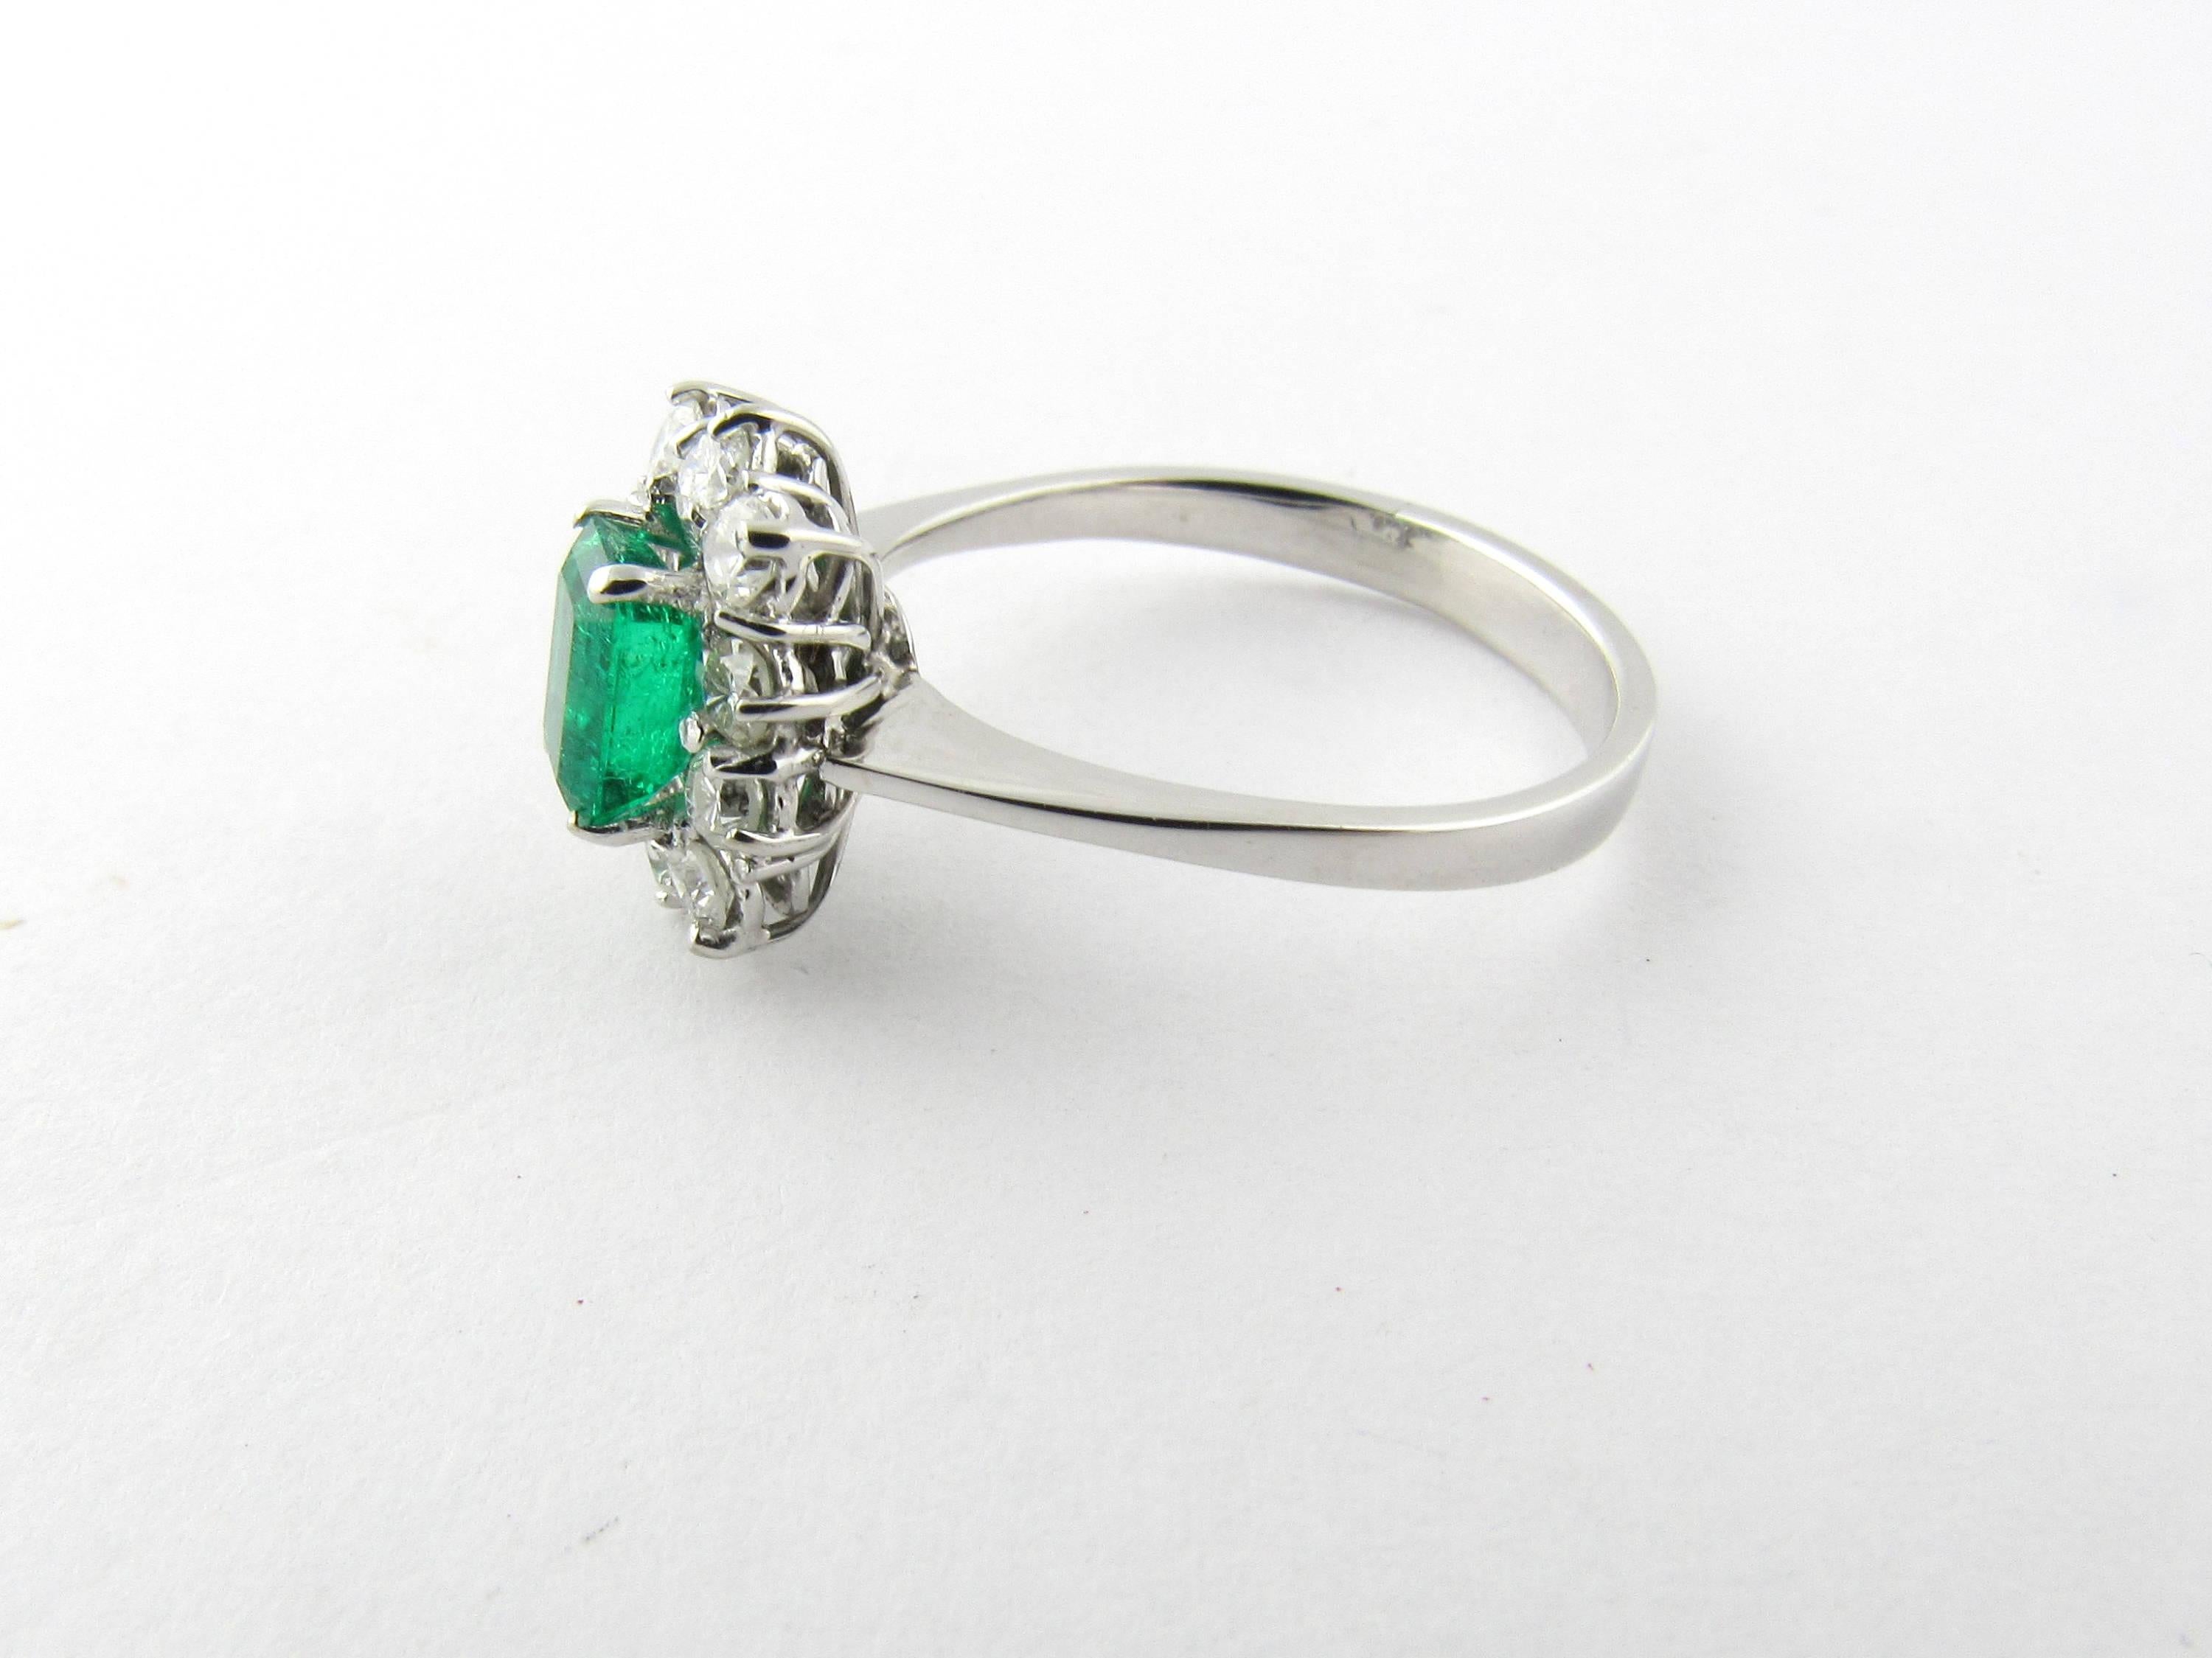 Vintage 18 Karat White Gold Emerald and Diamond Ring Size 7.5- 
This stunning ring features a lovely emerald cut emerald surrounded by 10 round brilliant cut diamonds set in 14K white gold. 
Approximate total diamond weight: .70 ct. 
Diamond